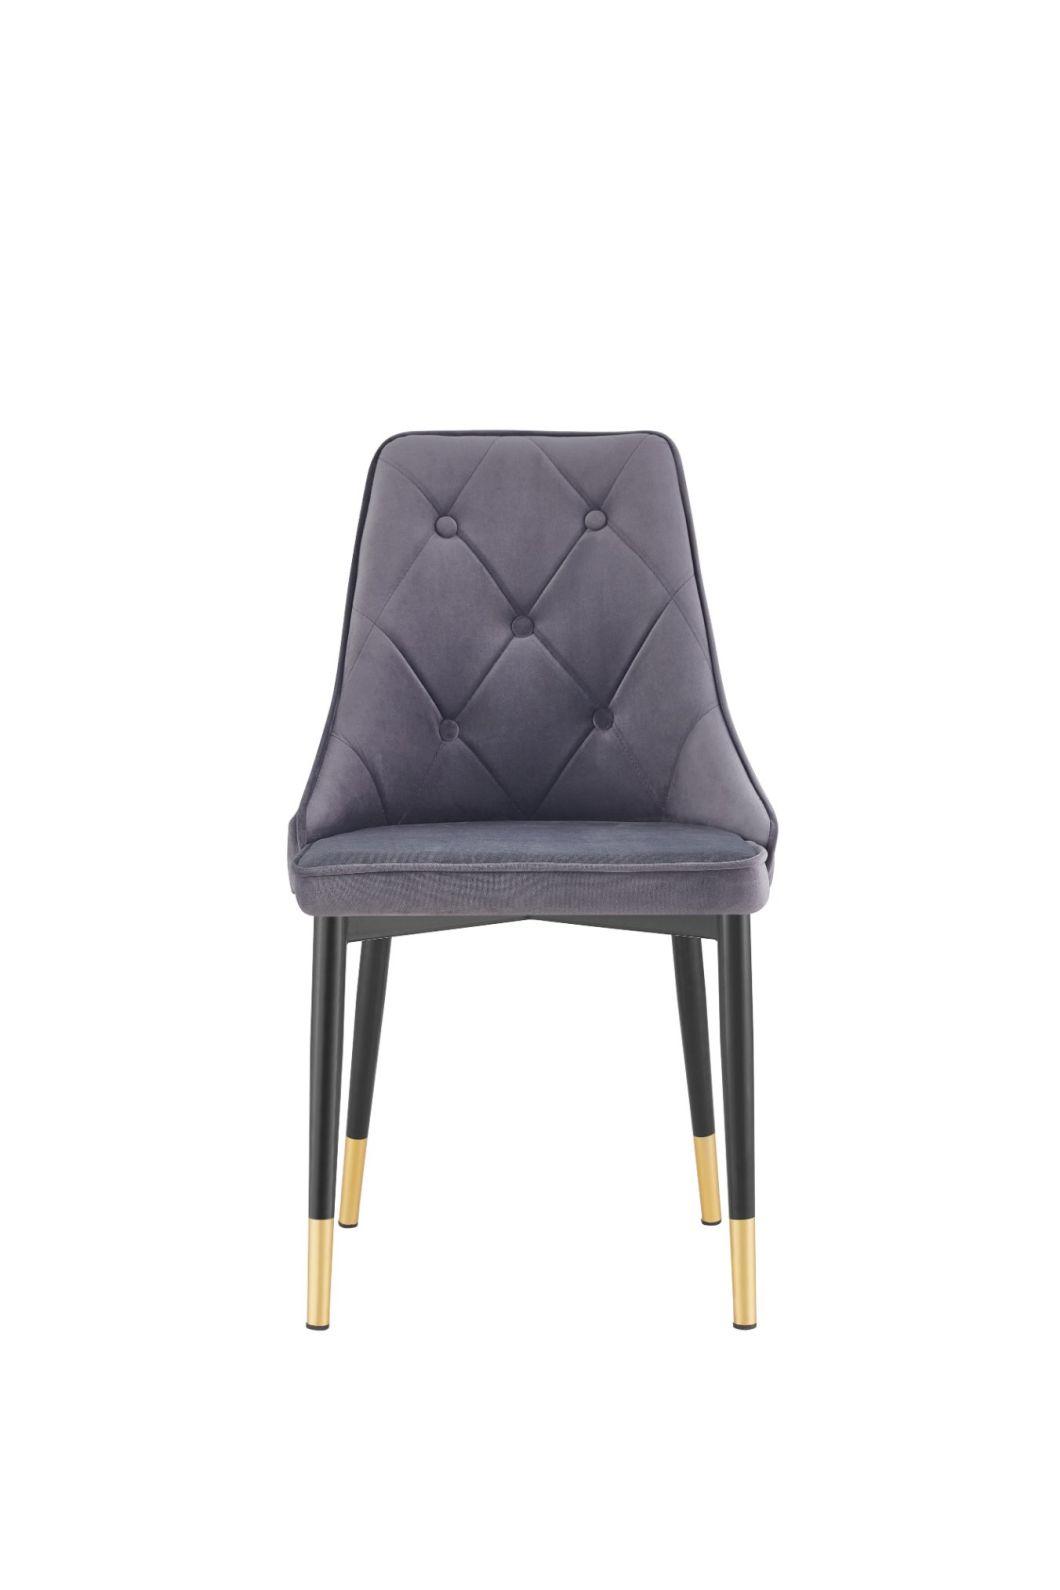 Top Quality Nordic Restaurant Velvet Upholstered Dining Chair with Metal Legs